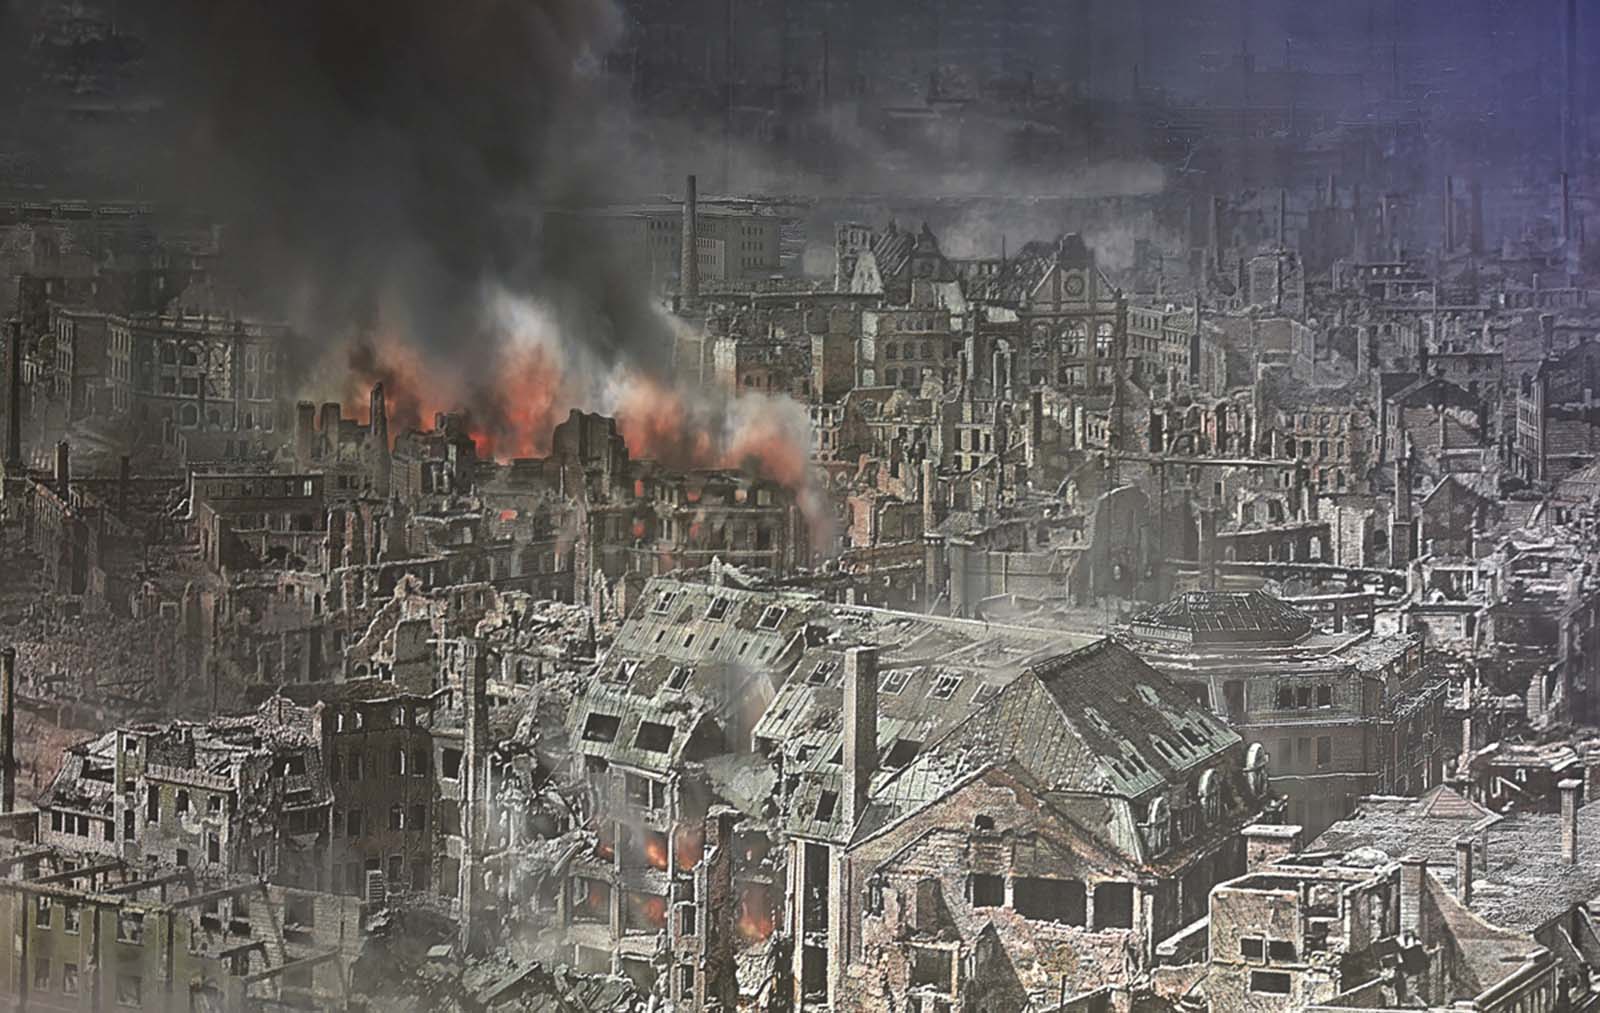 A general view of the a panorama display depicting the city of Dresden in the aftermath of the 1945 Allied firebombing.